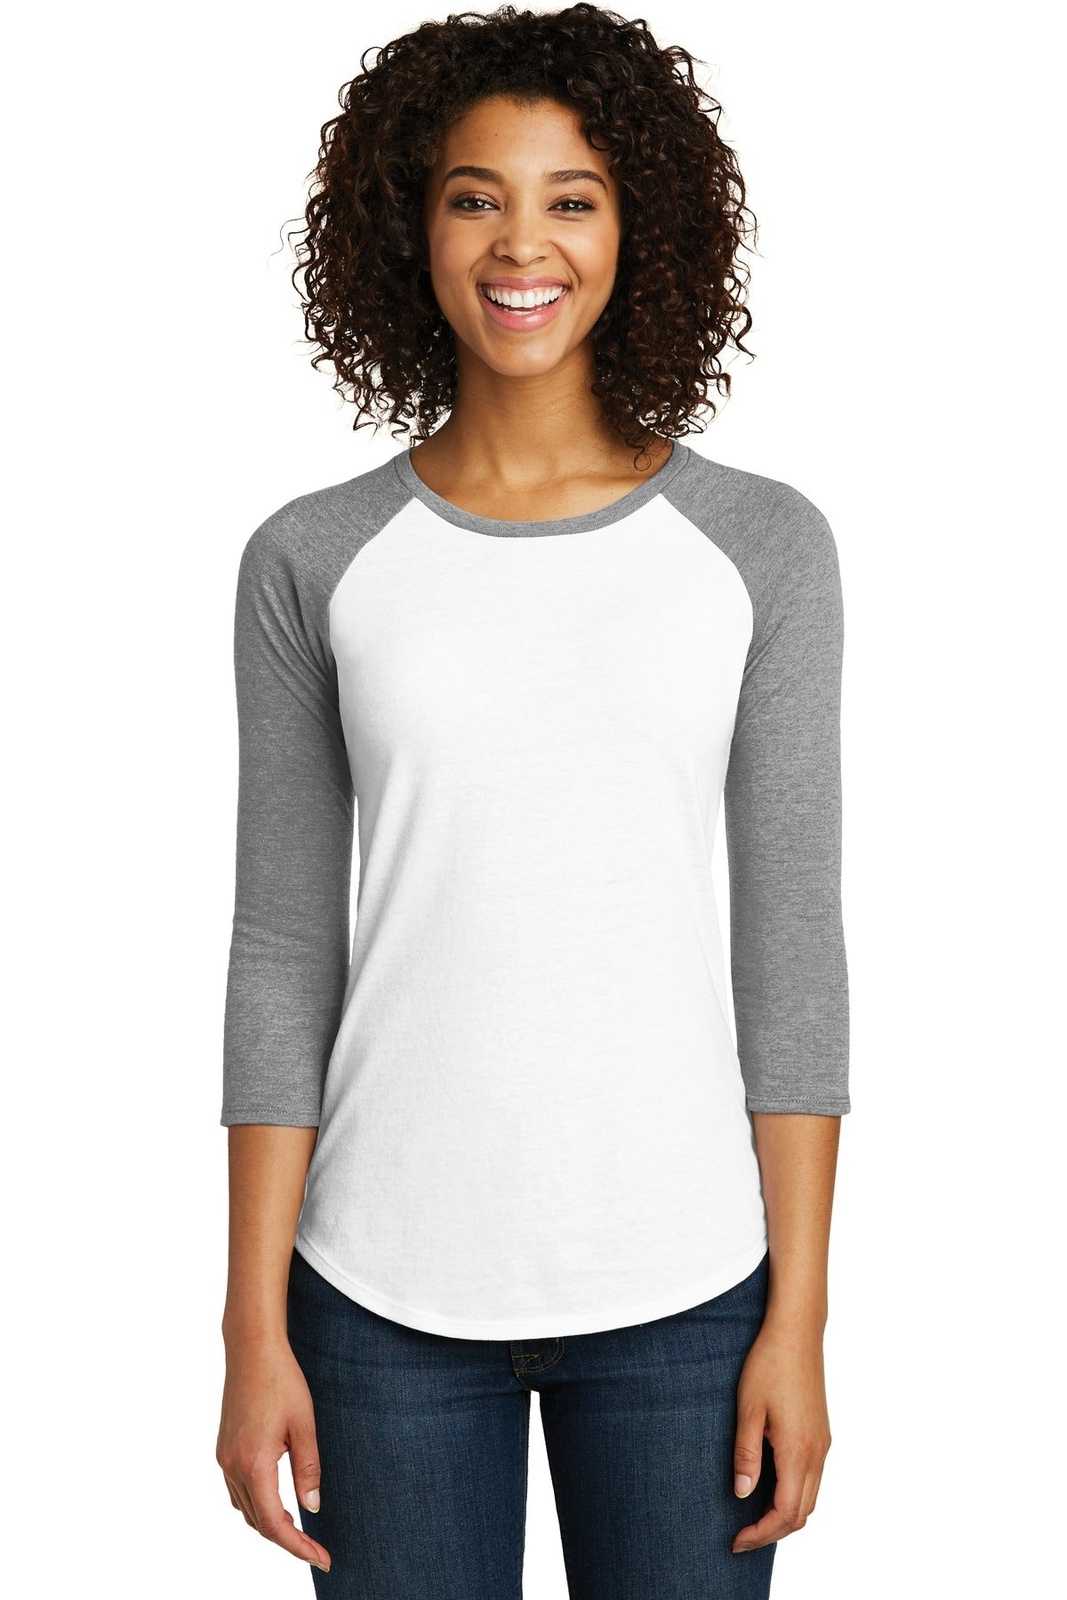 District DT6211 Women's Fitted Very Important Tee 3/4-Sleeve Raglan - Light Heather Gray White - HIT a Double - 1